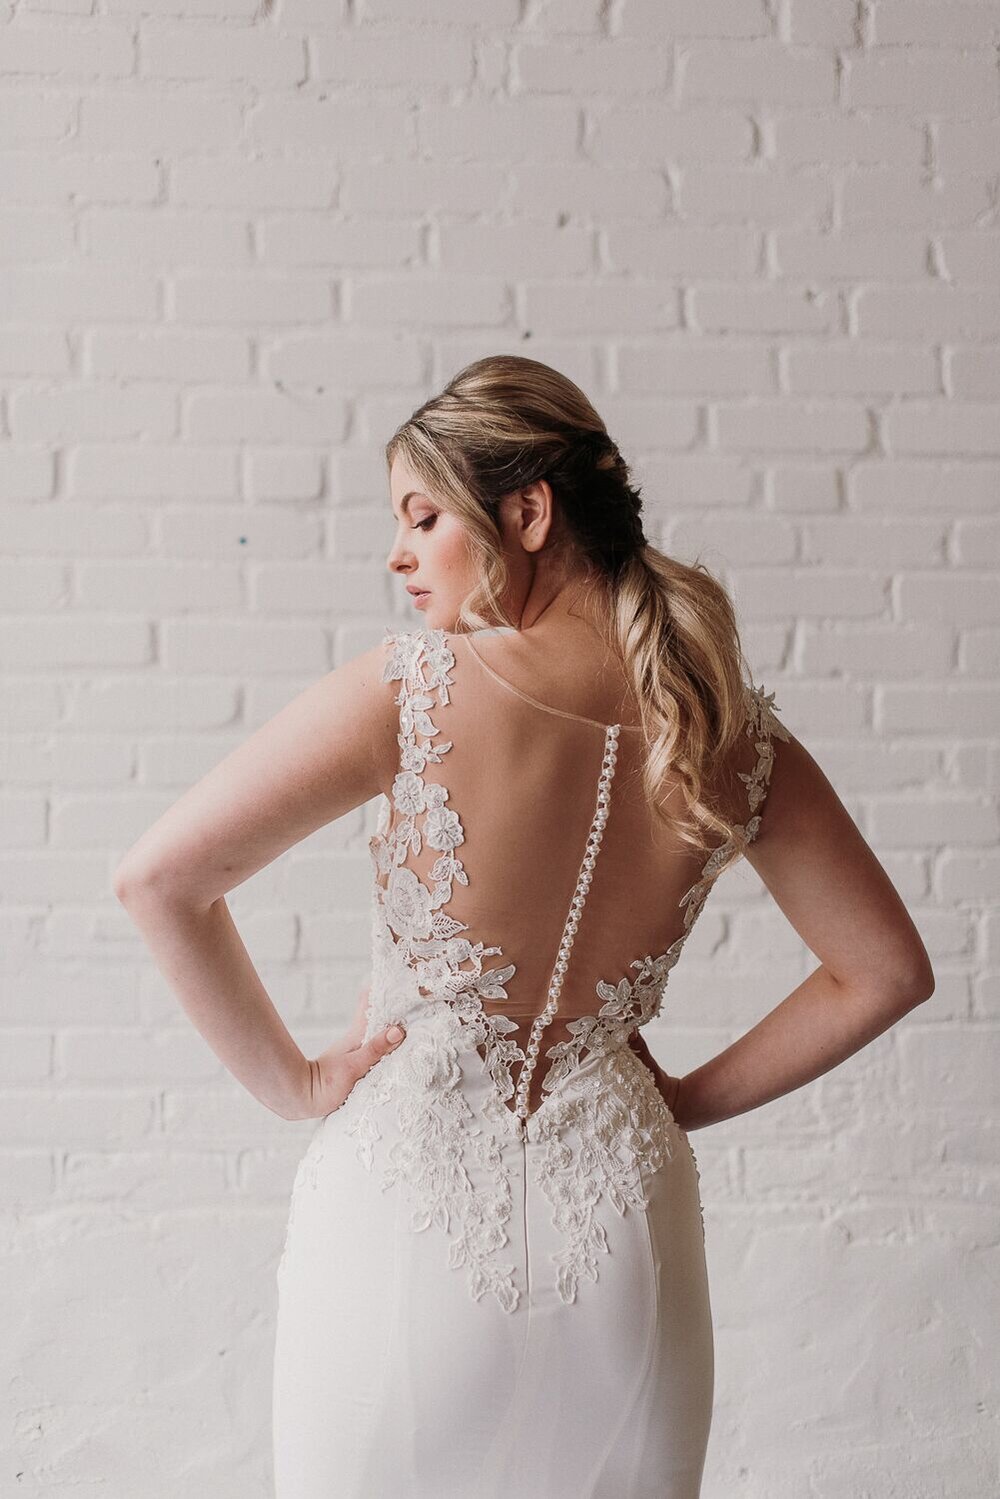 How to Style Your Hair Based on the Wedding Gown Neckline